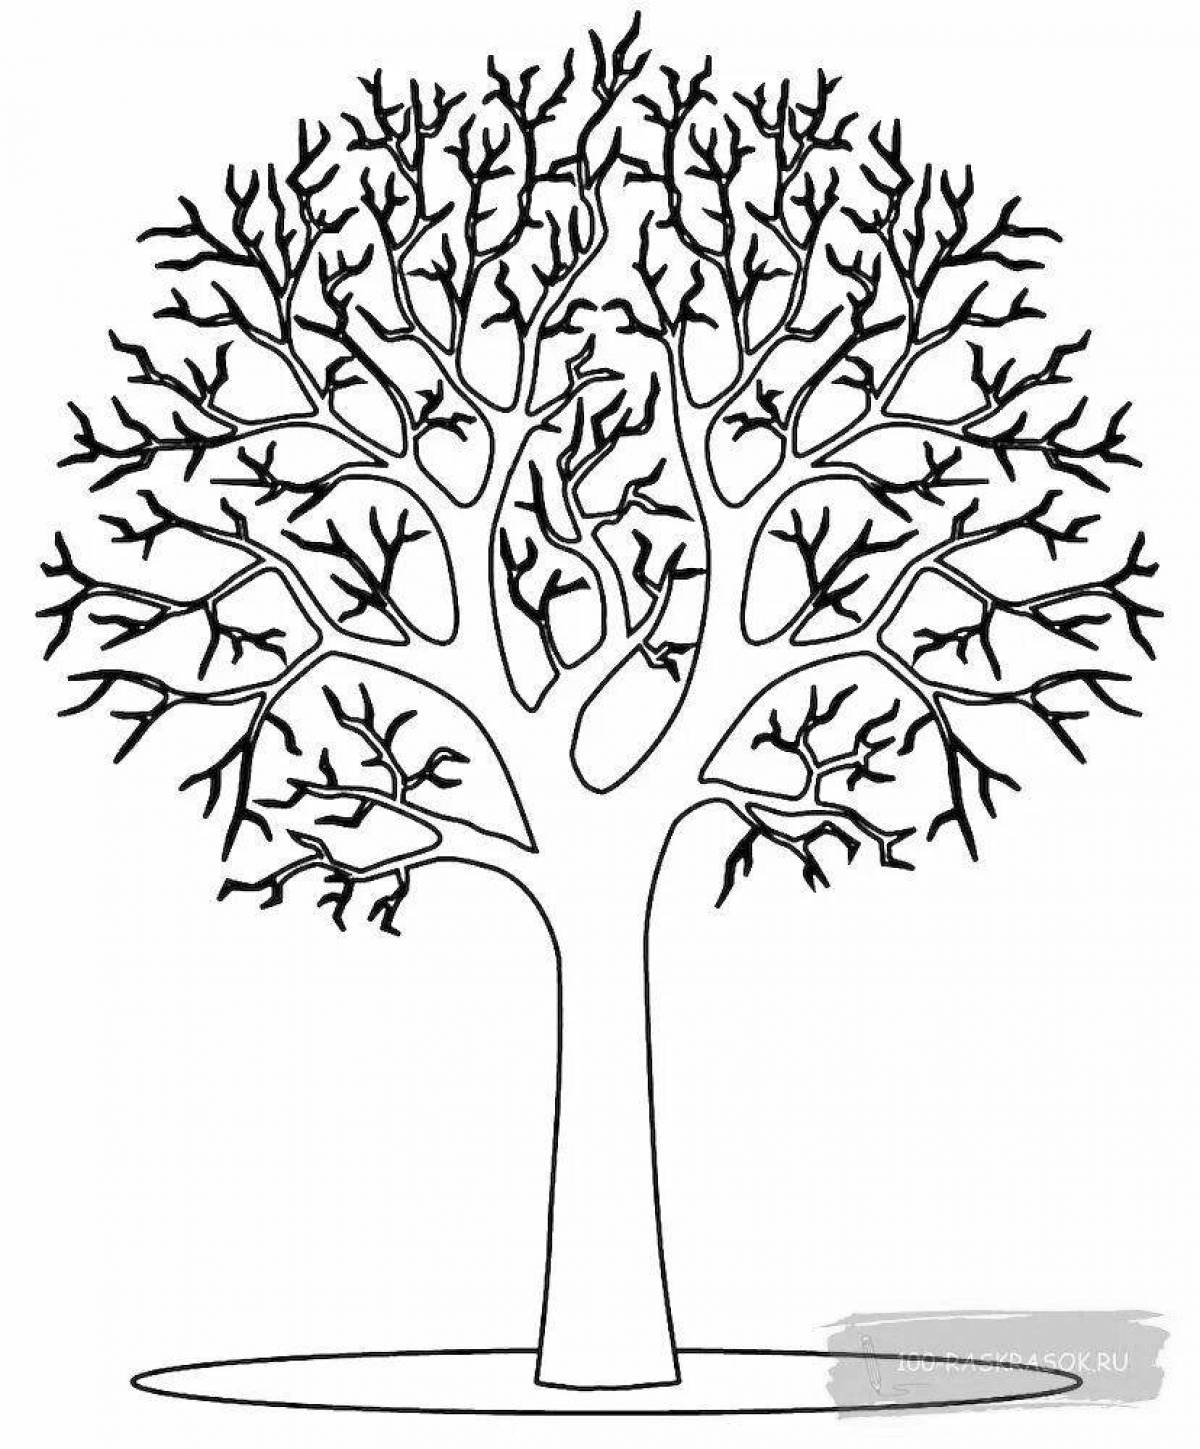 Coloring book big tree silhouette